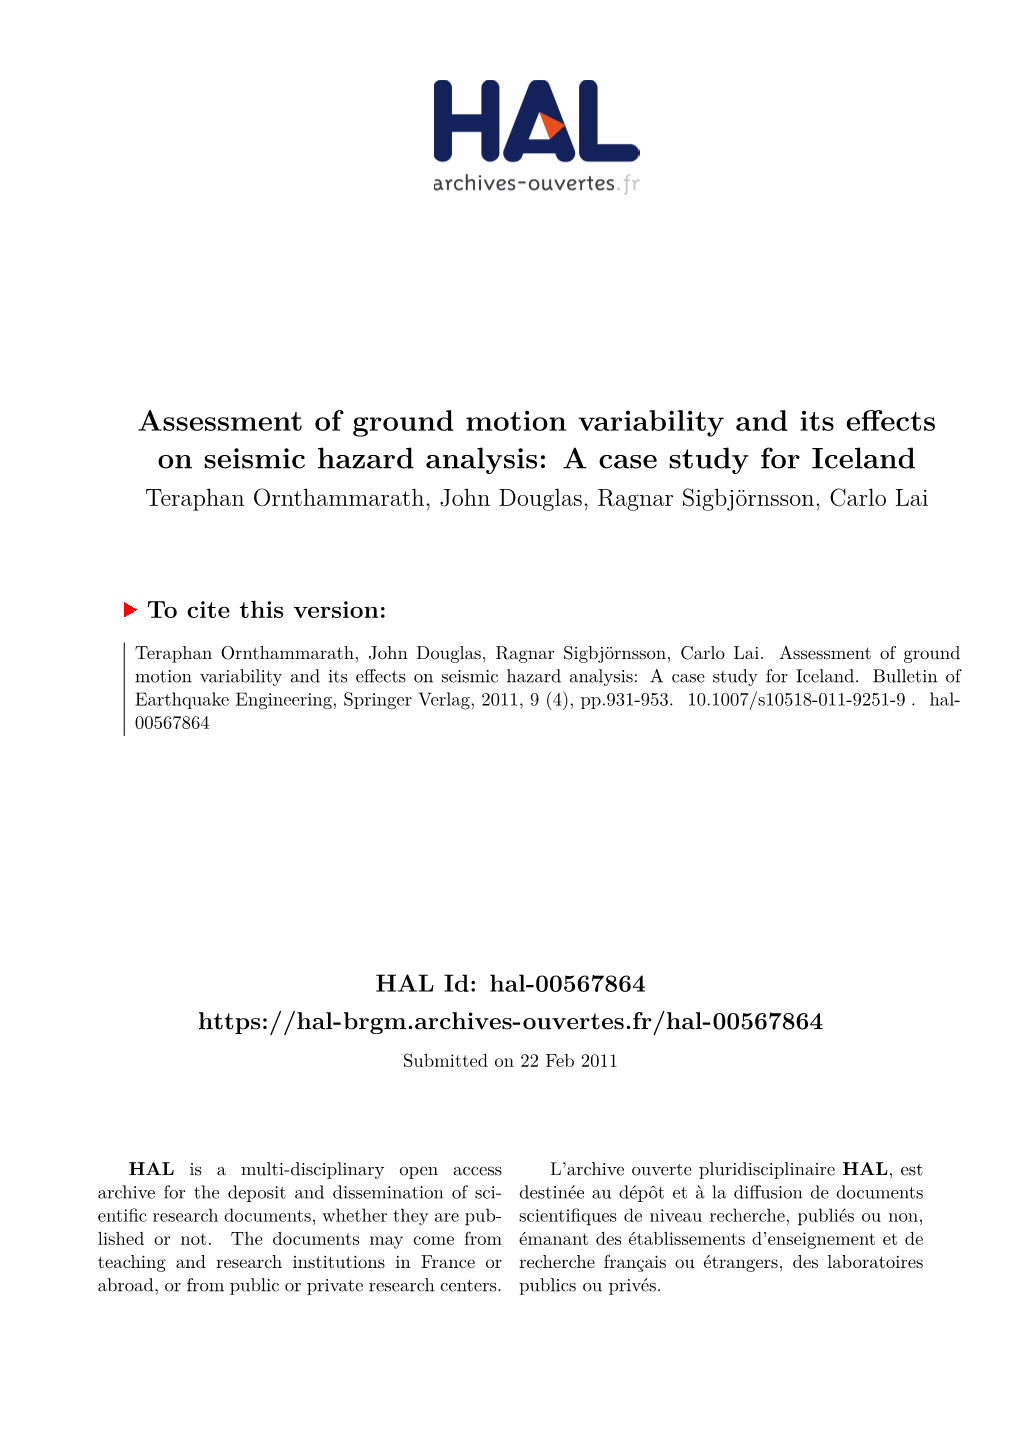 Assessment of Ground Motion Variability and Its